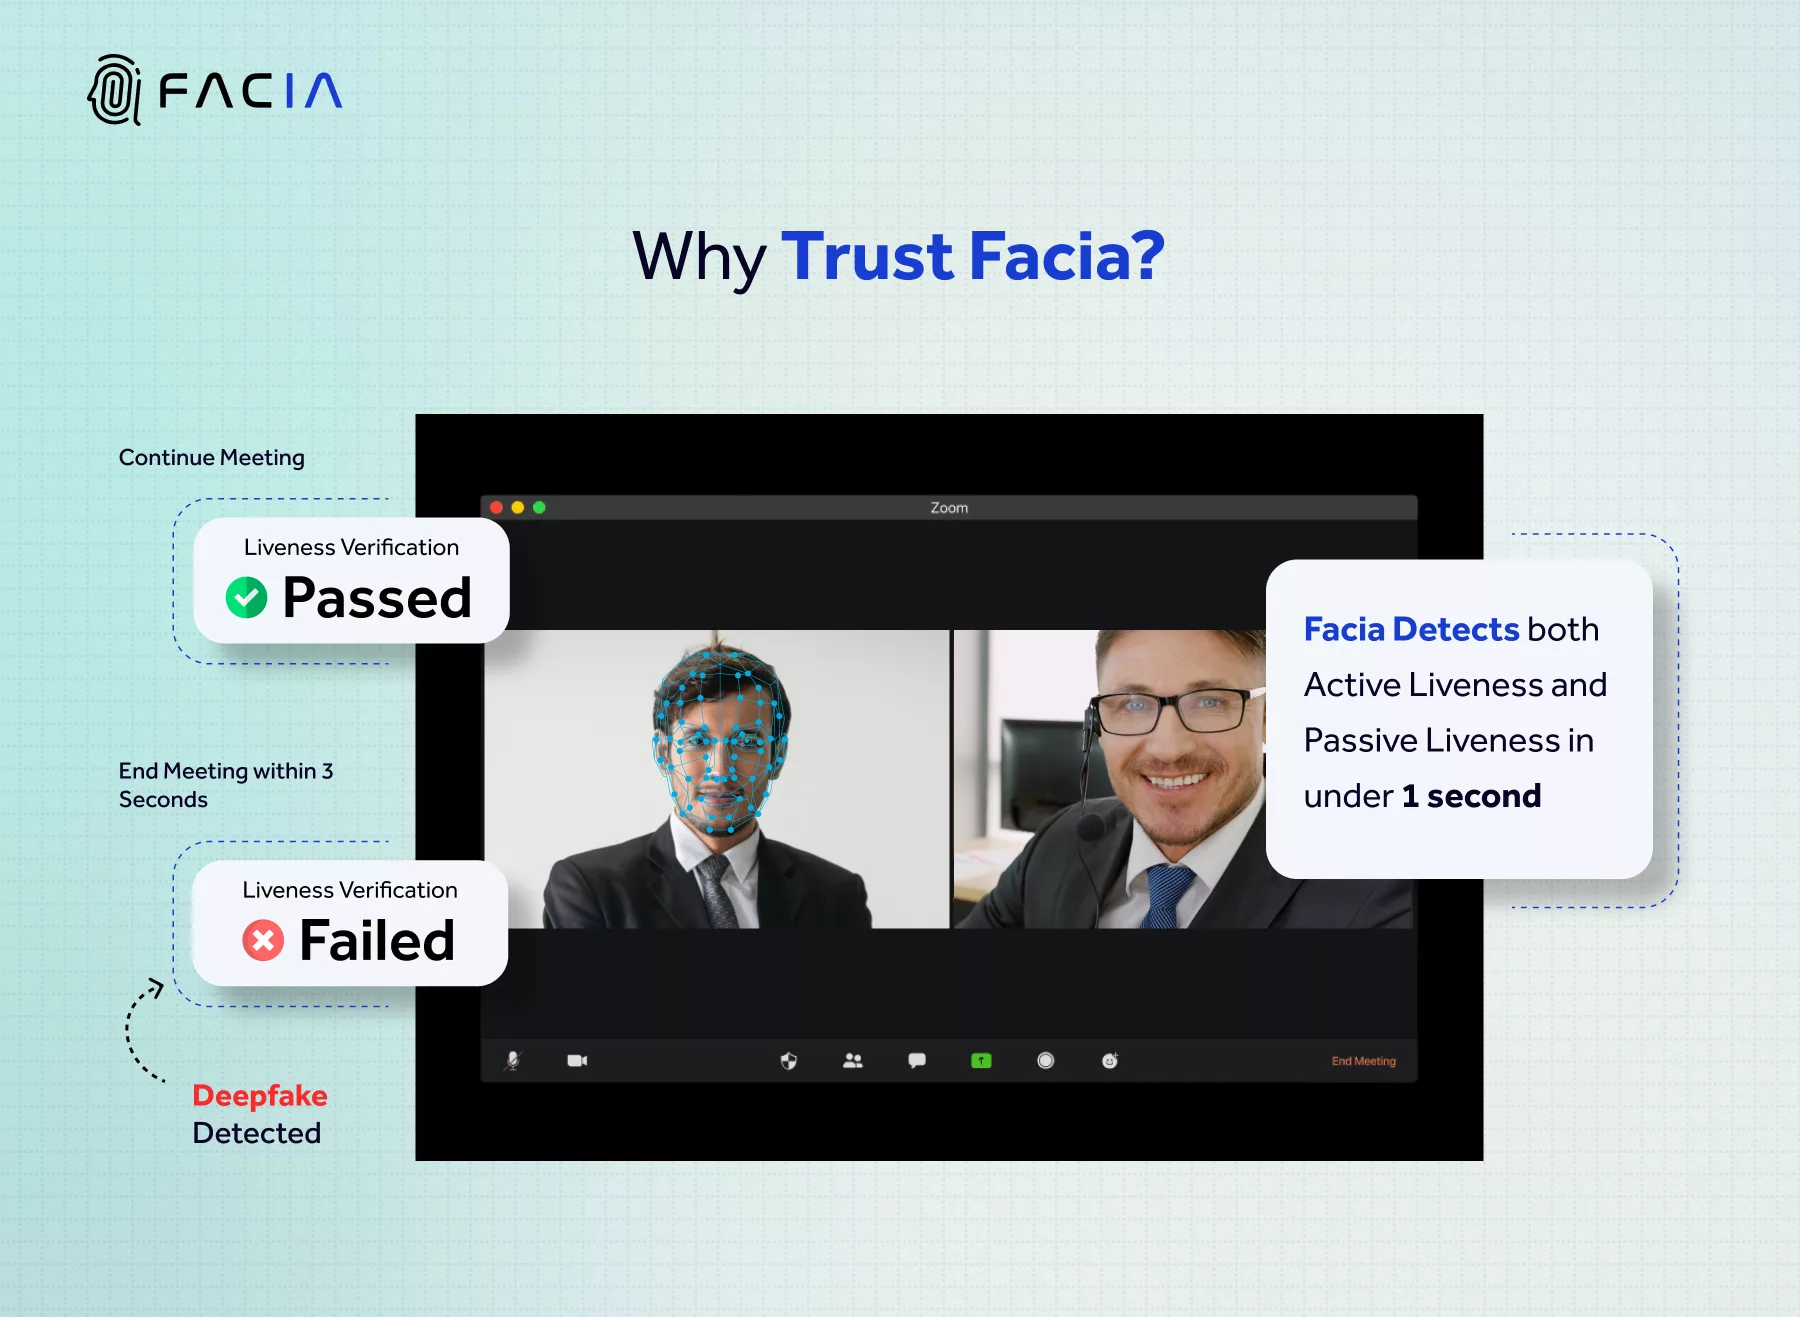 Trust Facia because of its speed of verifying both Active Liveness and Passive Liveness in under 1 second during video calls on web conferencing software like Zoom.